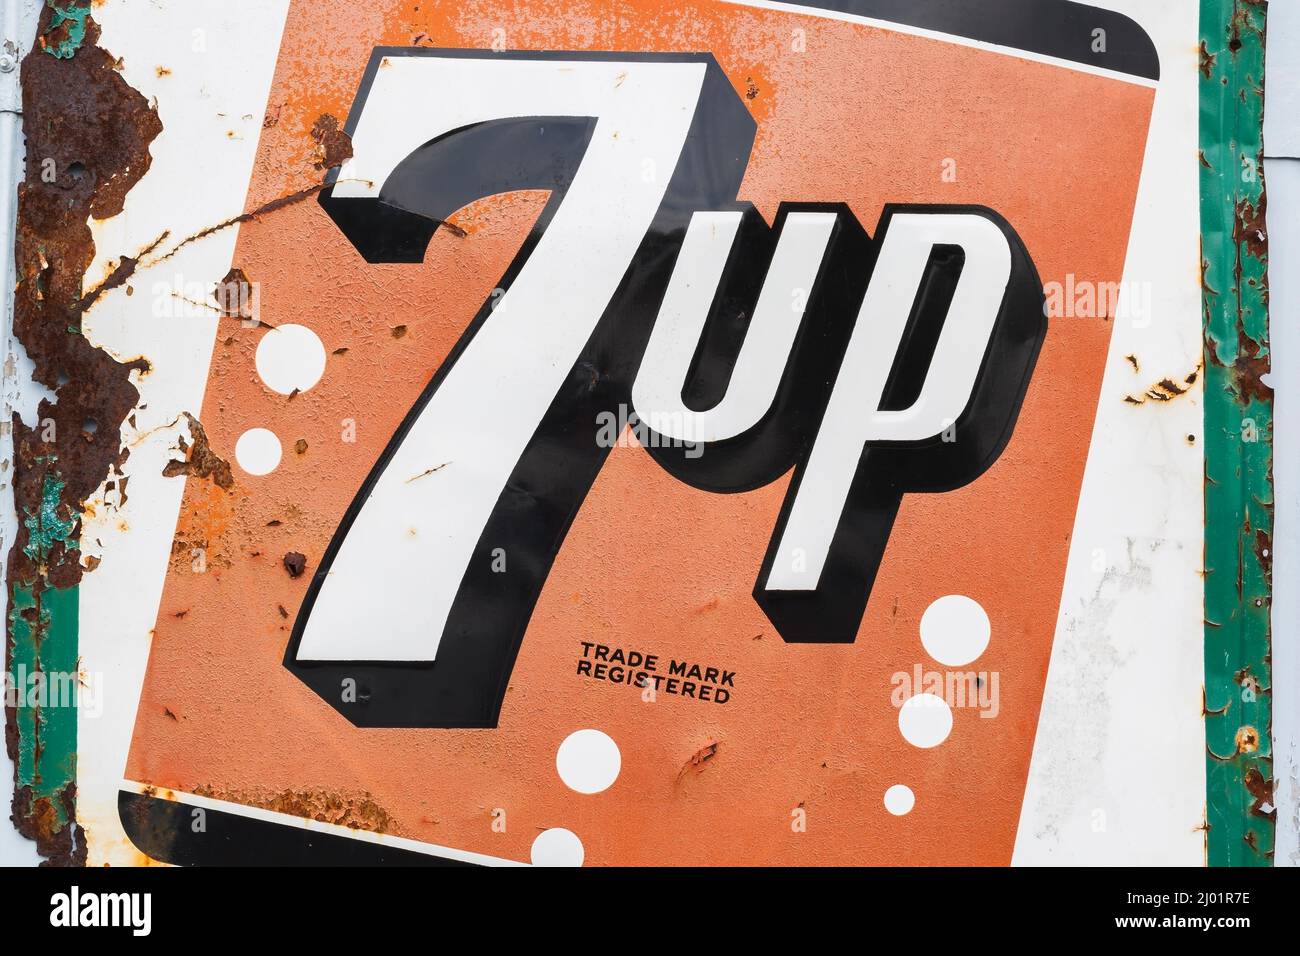 Vintage 7up soft drink company metal advertising sign posted on exterior wall of garage. Stock Photo